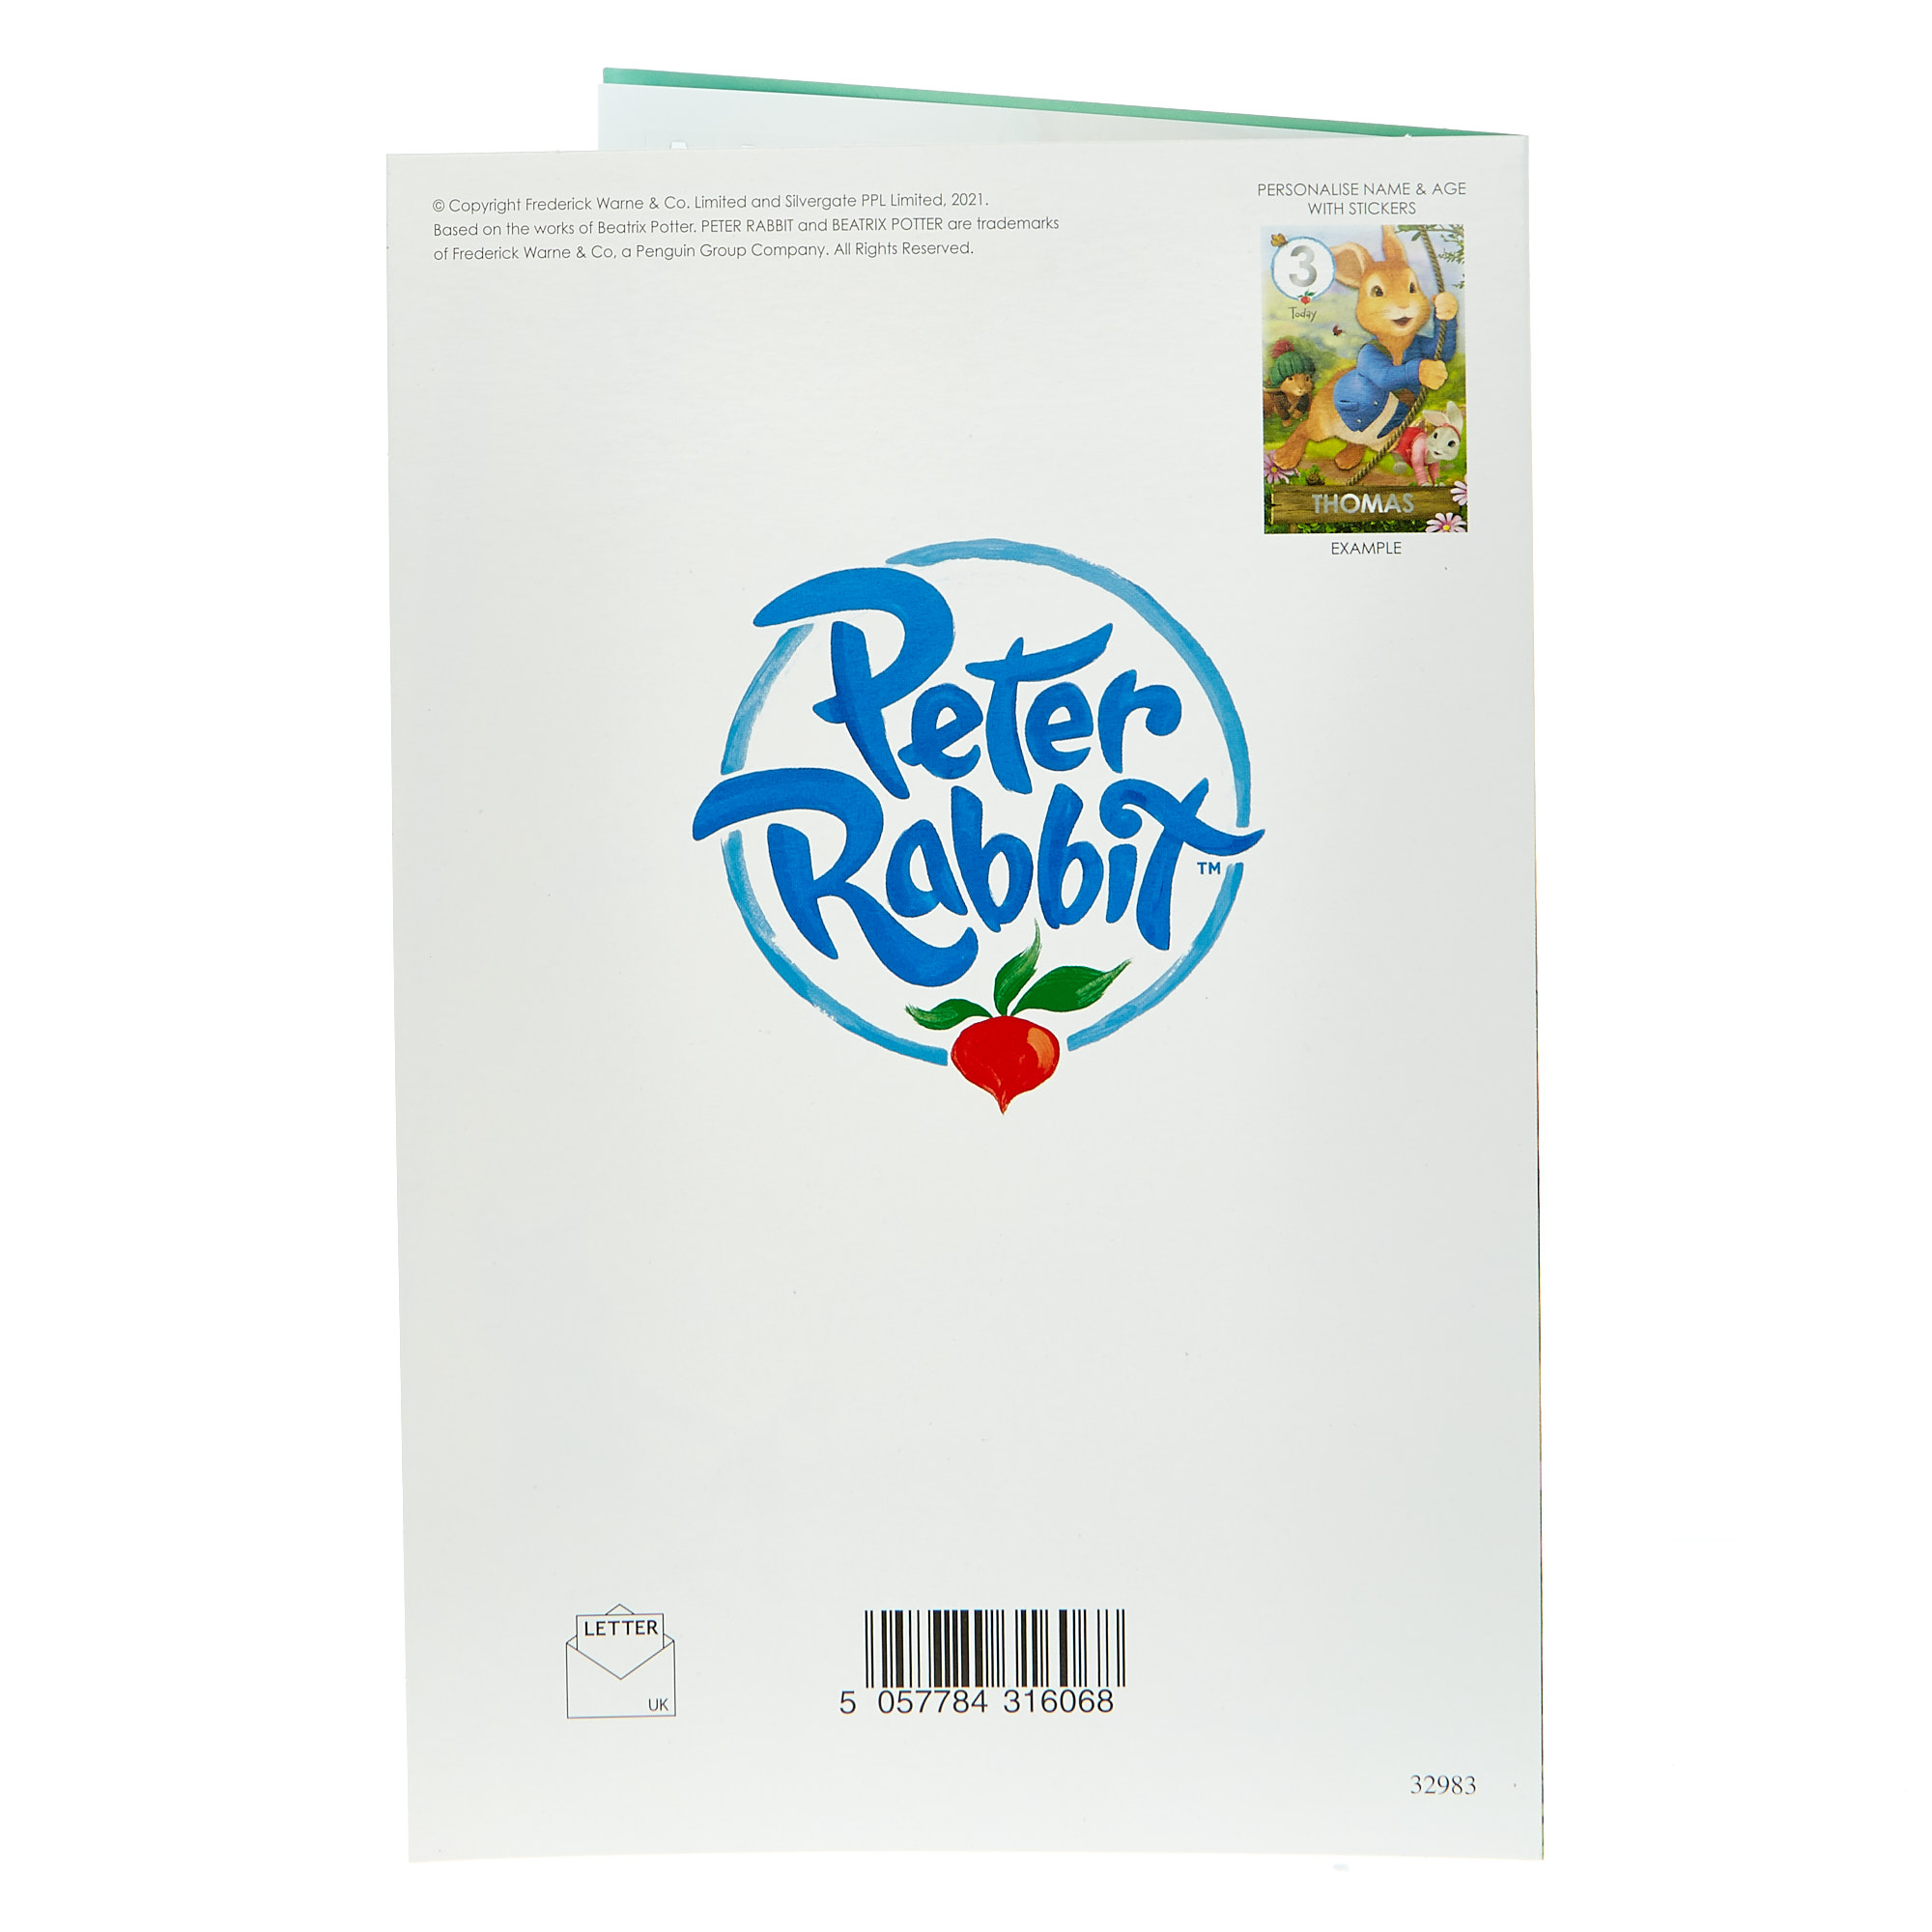 Peter Rabbit Birthday Card - Name & Age Stickers 